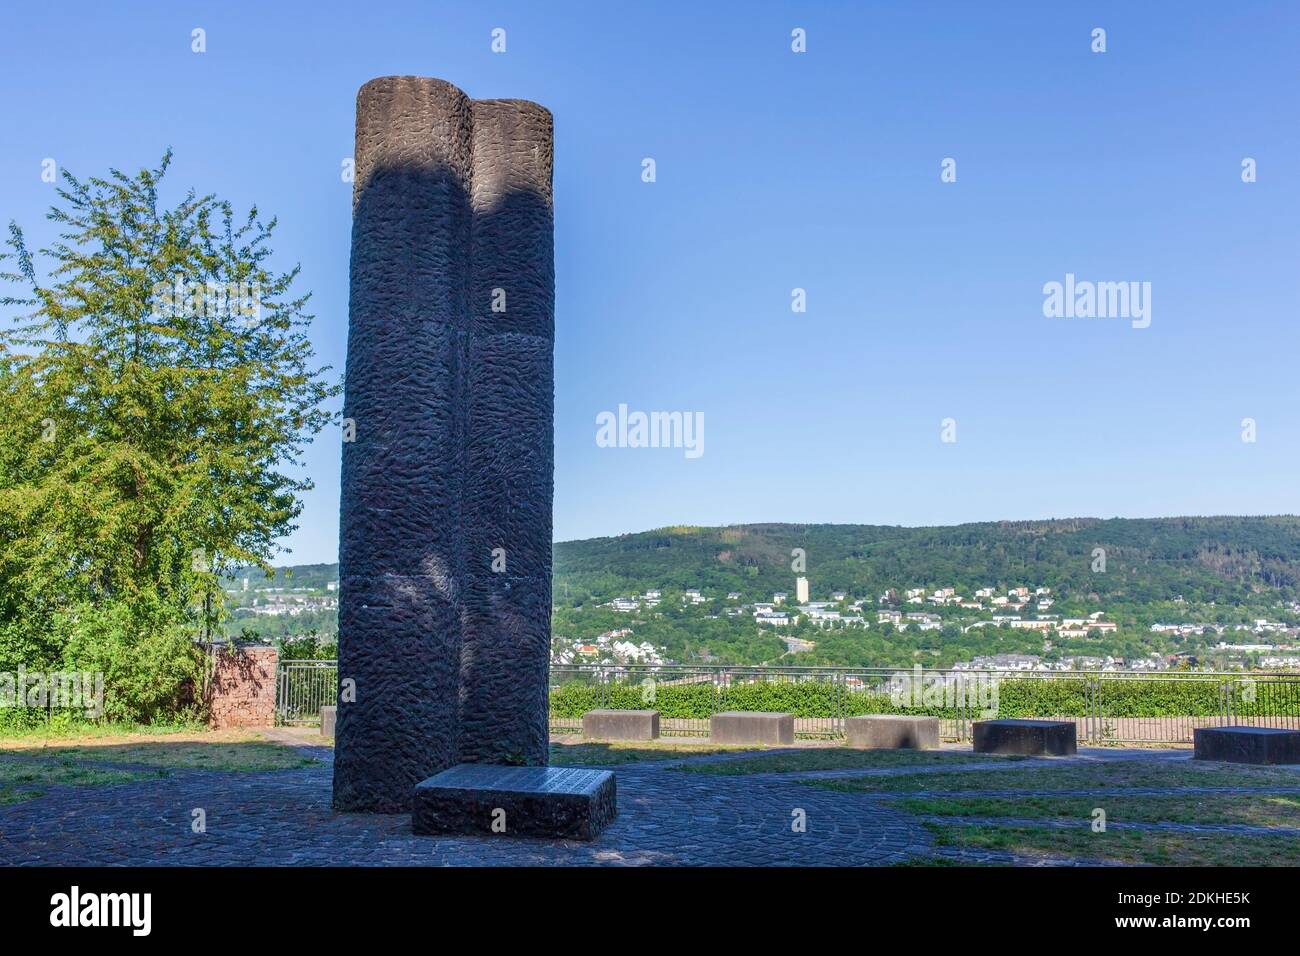 Rittersturz monument, view from the Rittersturz of the Rhine Valley, Koblenz, Rhineland-Palatinate, Germany, Europe Stock Photo